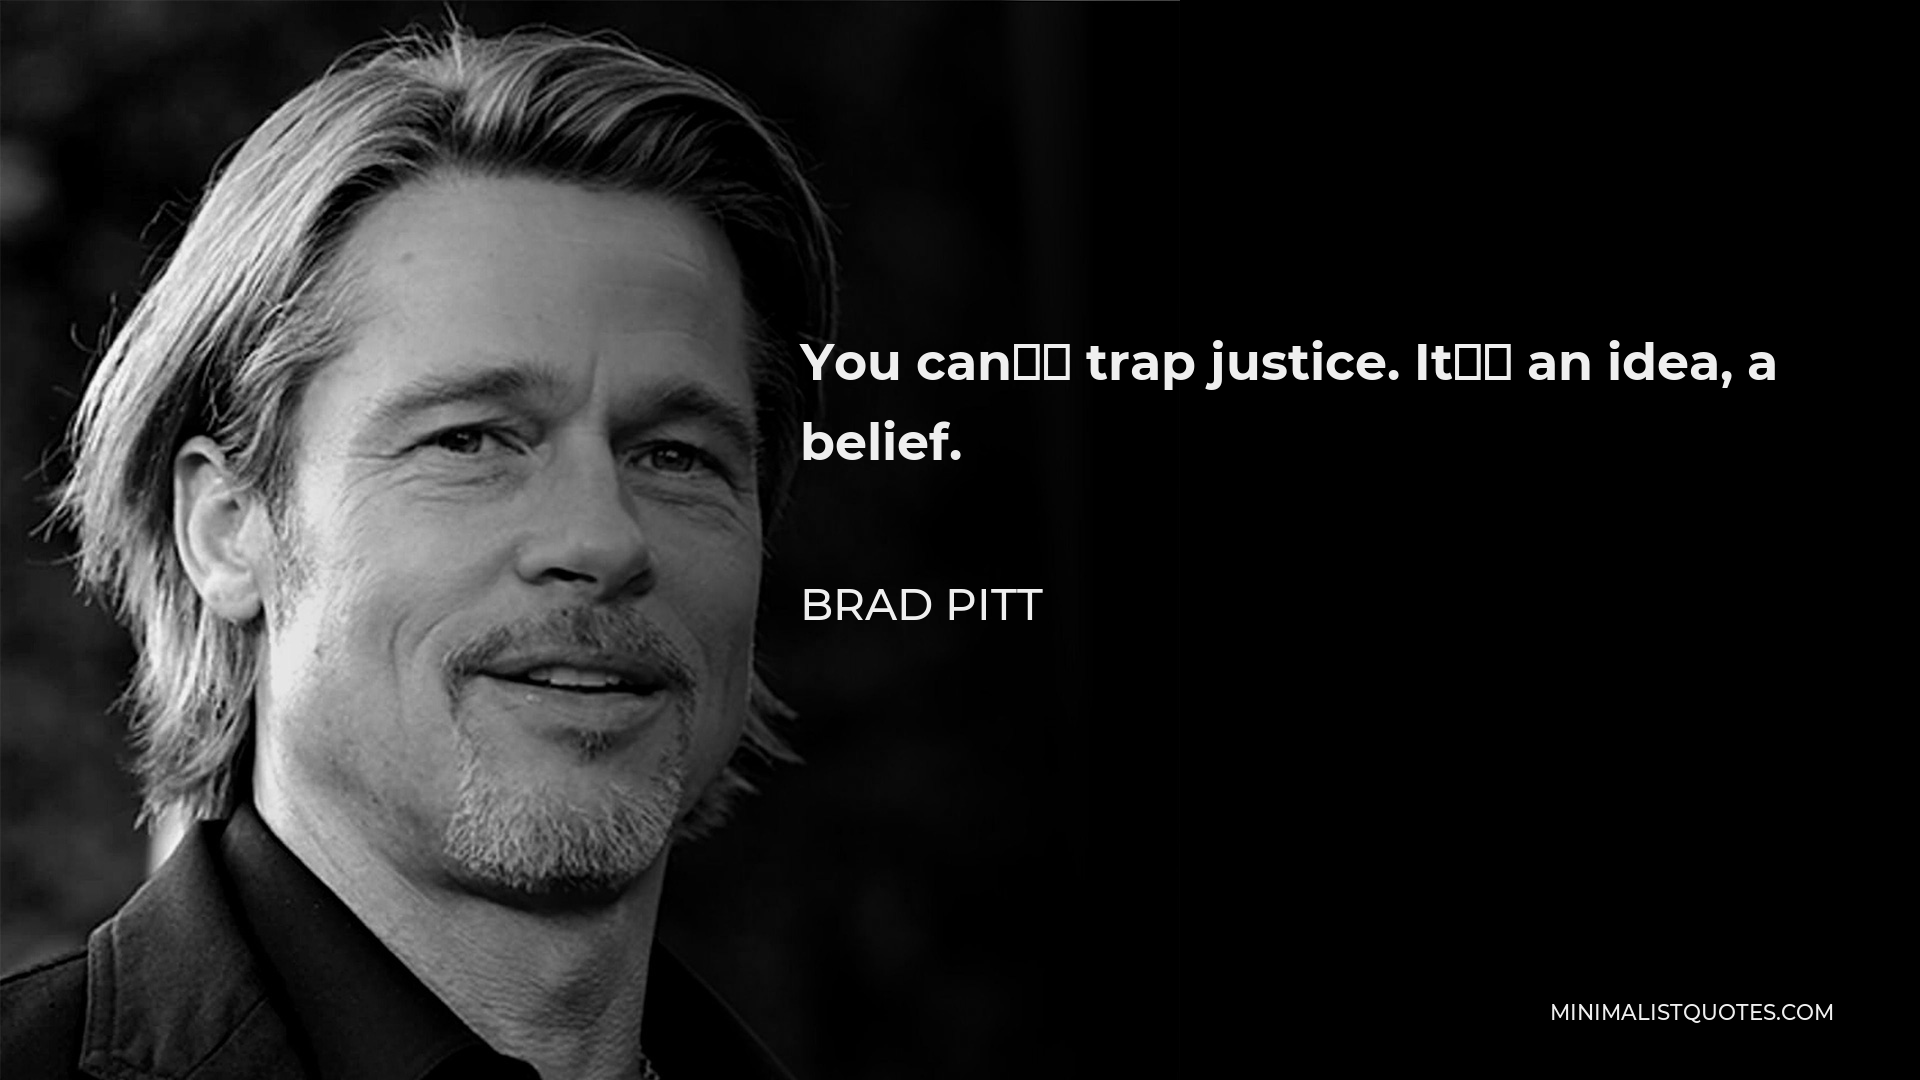 Brad Pitt Quote - You can’t trap justice. It’s an idea, a belief.